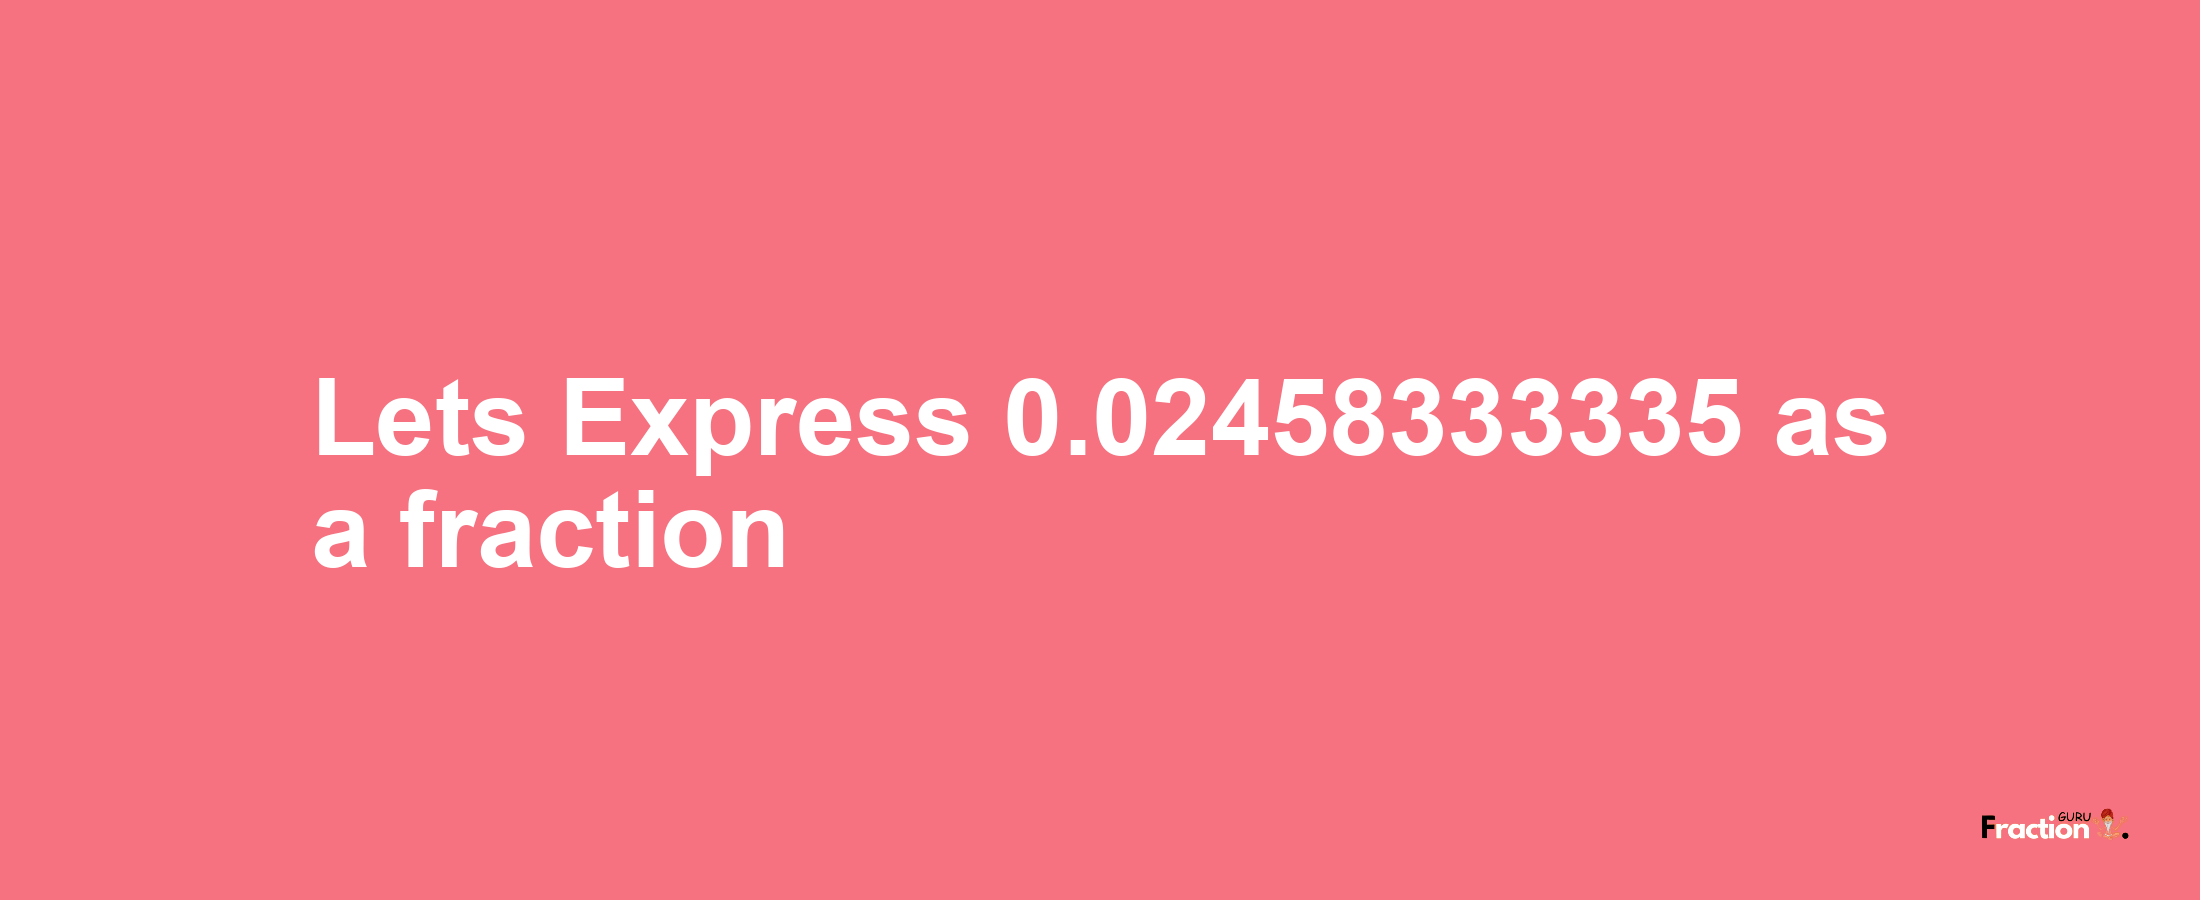 Lets Express 0.02458333335 as afraction